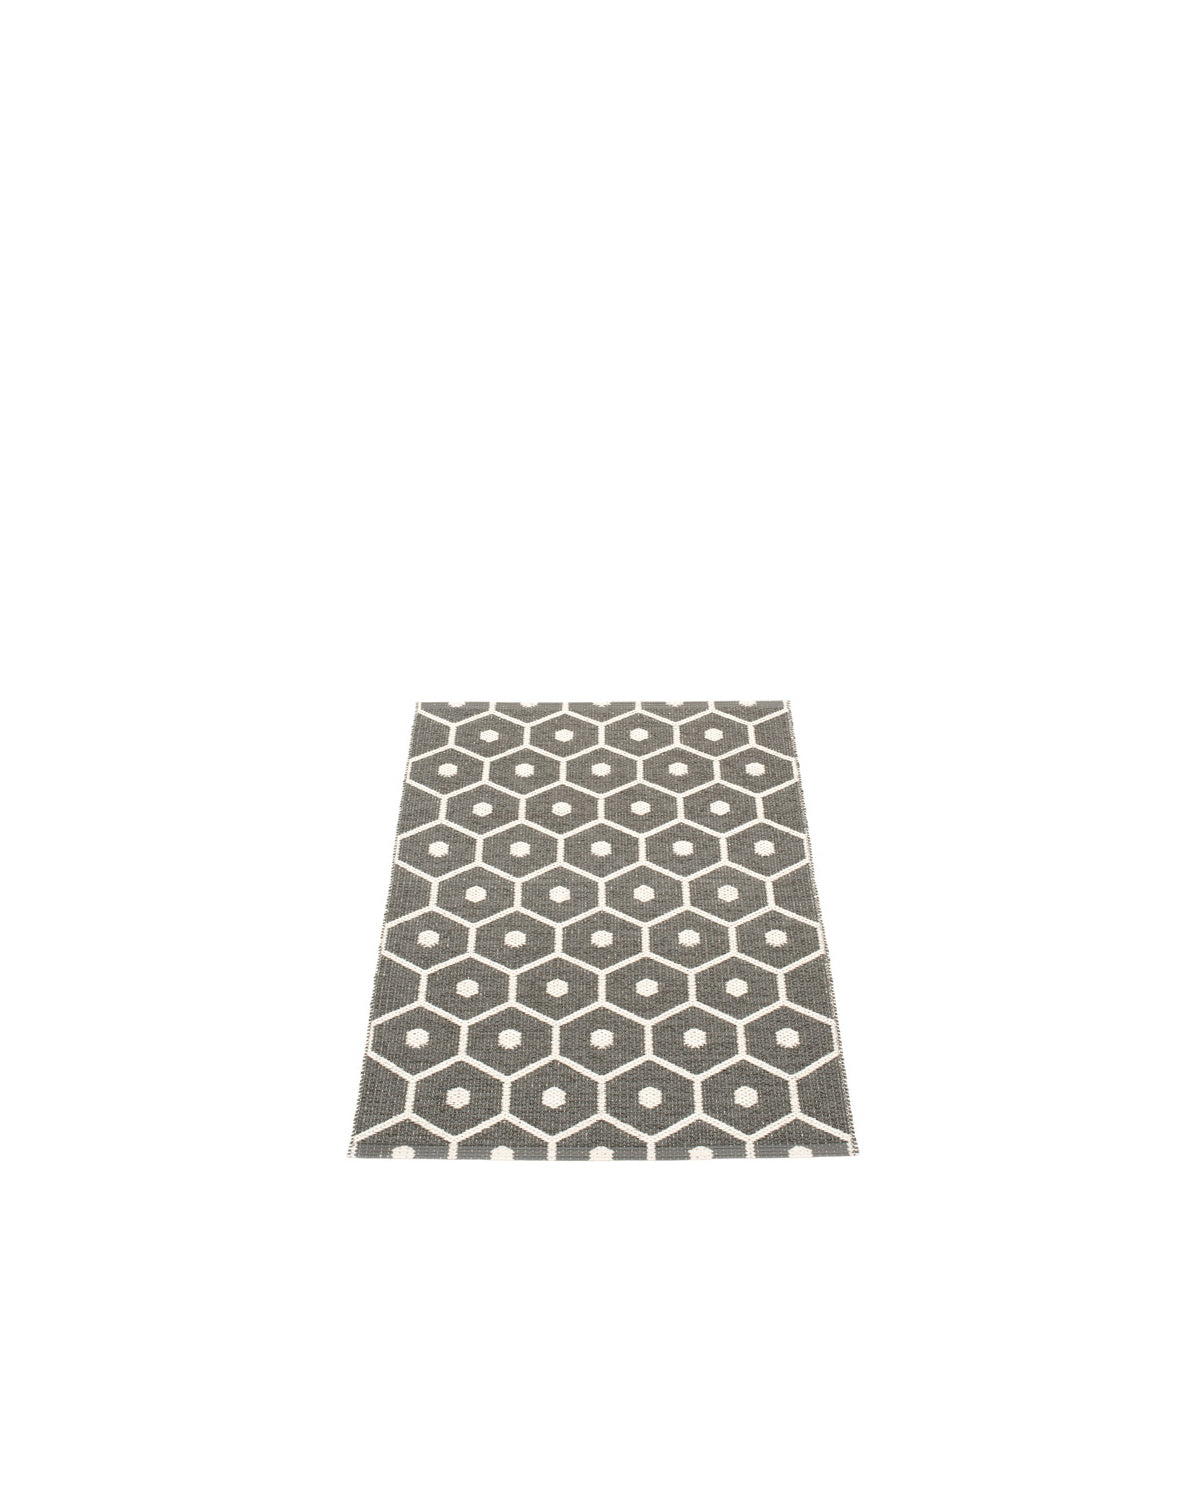 Pappelina Rug HONEY Charcoal  image 3